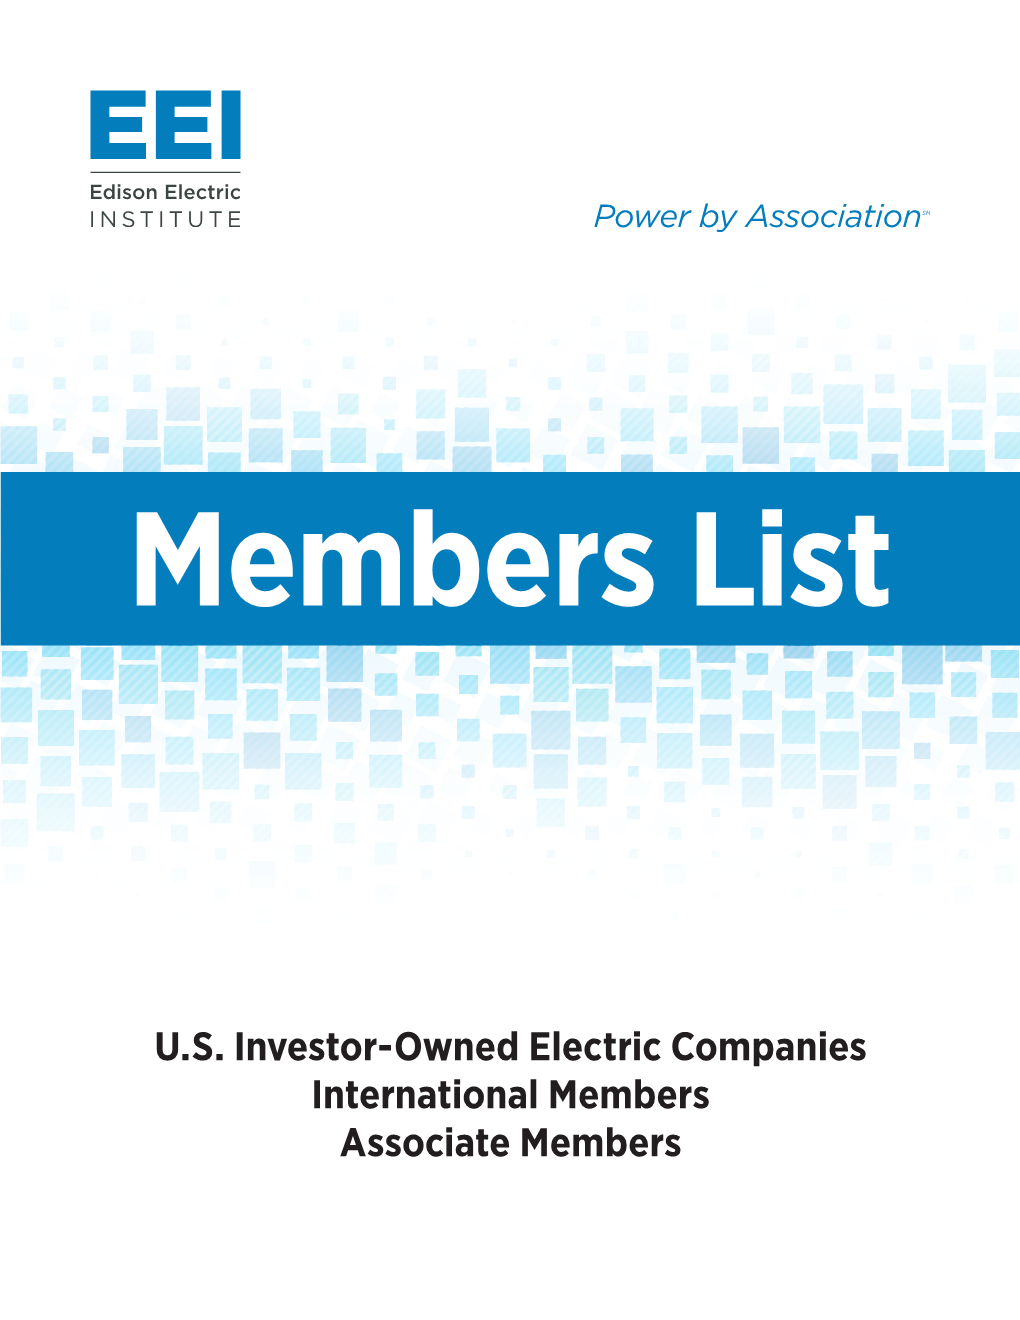 U.S. Investor-Owned Electric Companies International Members Associate Members EEI the Edison Electric Institute, Is the Association That Represents All U.S